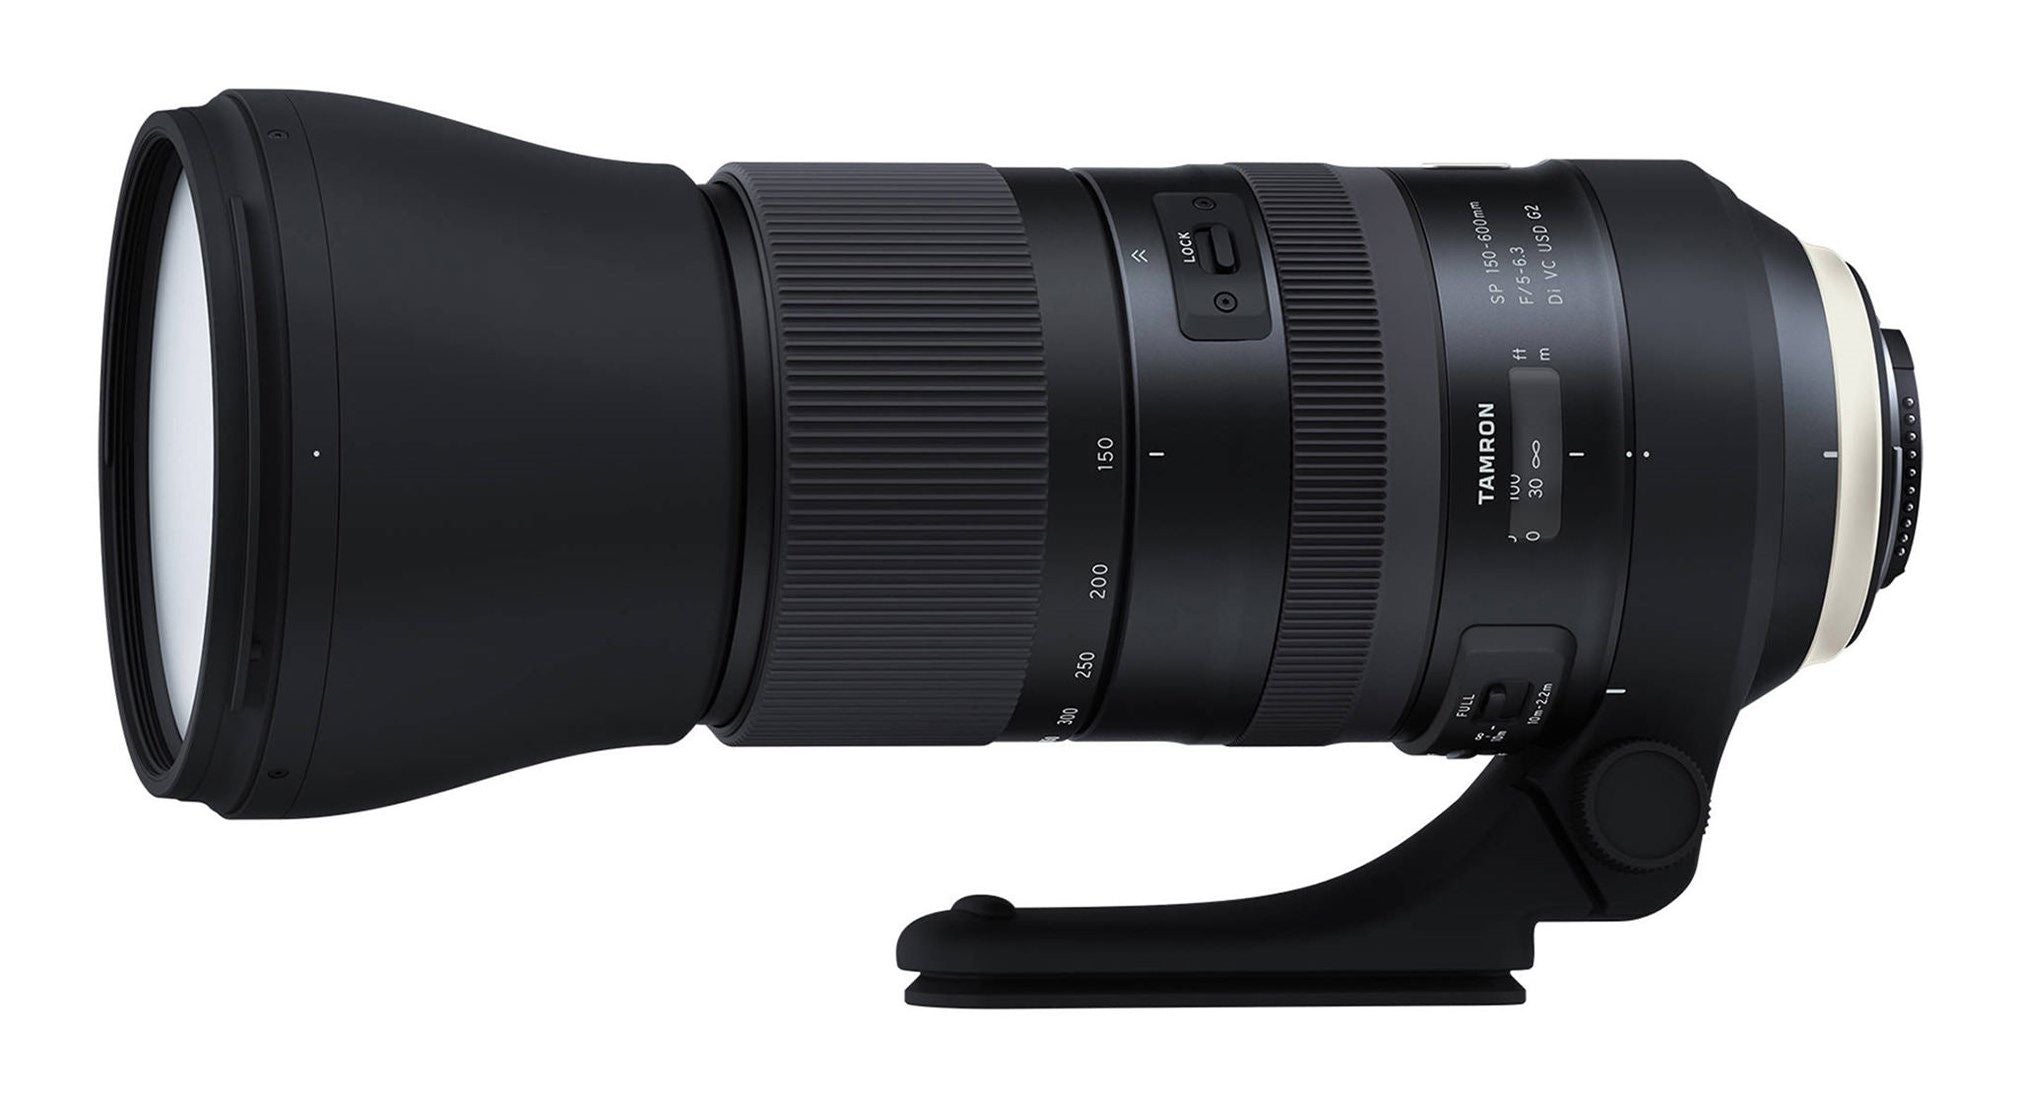 Tamron SP 150-600mm F5.0-6.3 VC USD G2 lens - Canon Fit